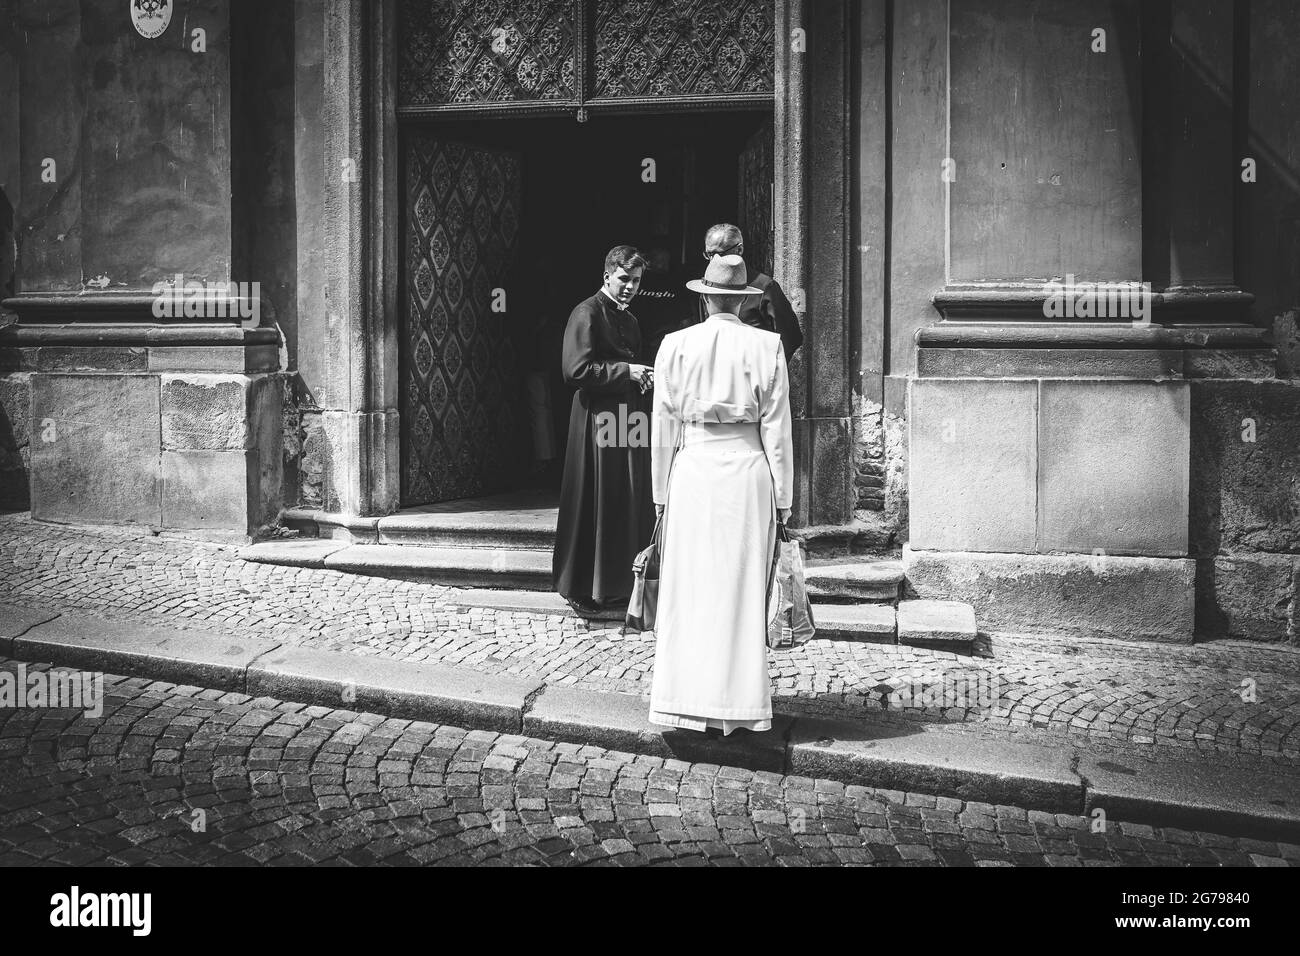 Priest in front of church in Prague Stock Photo